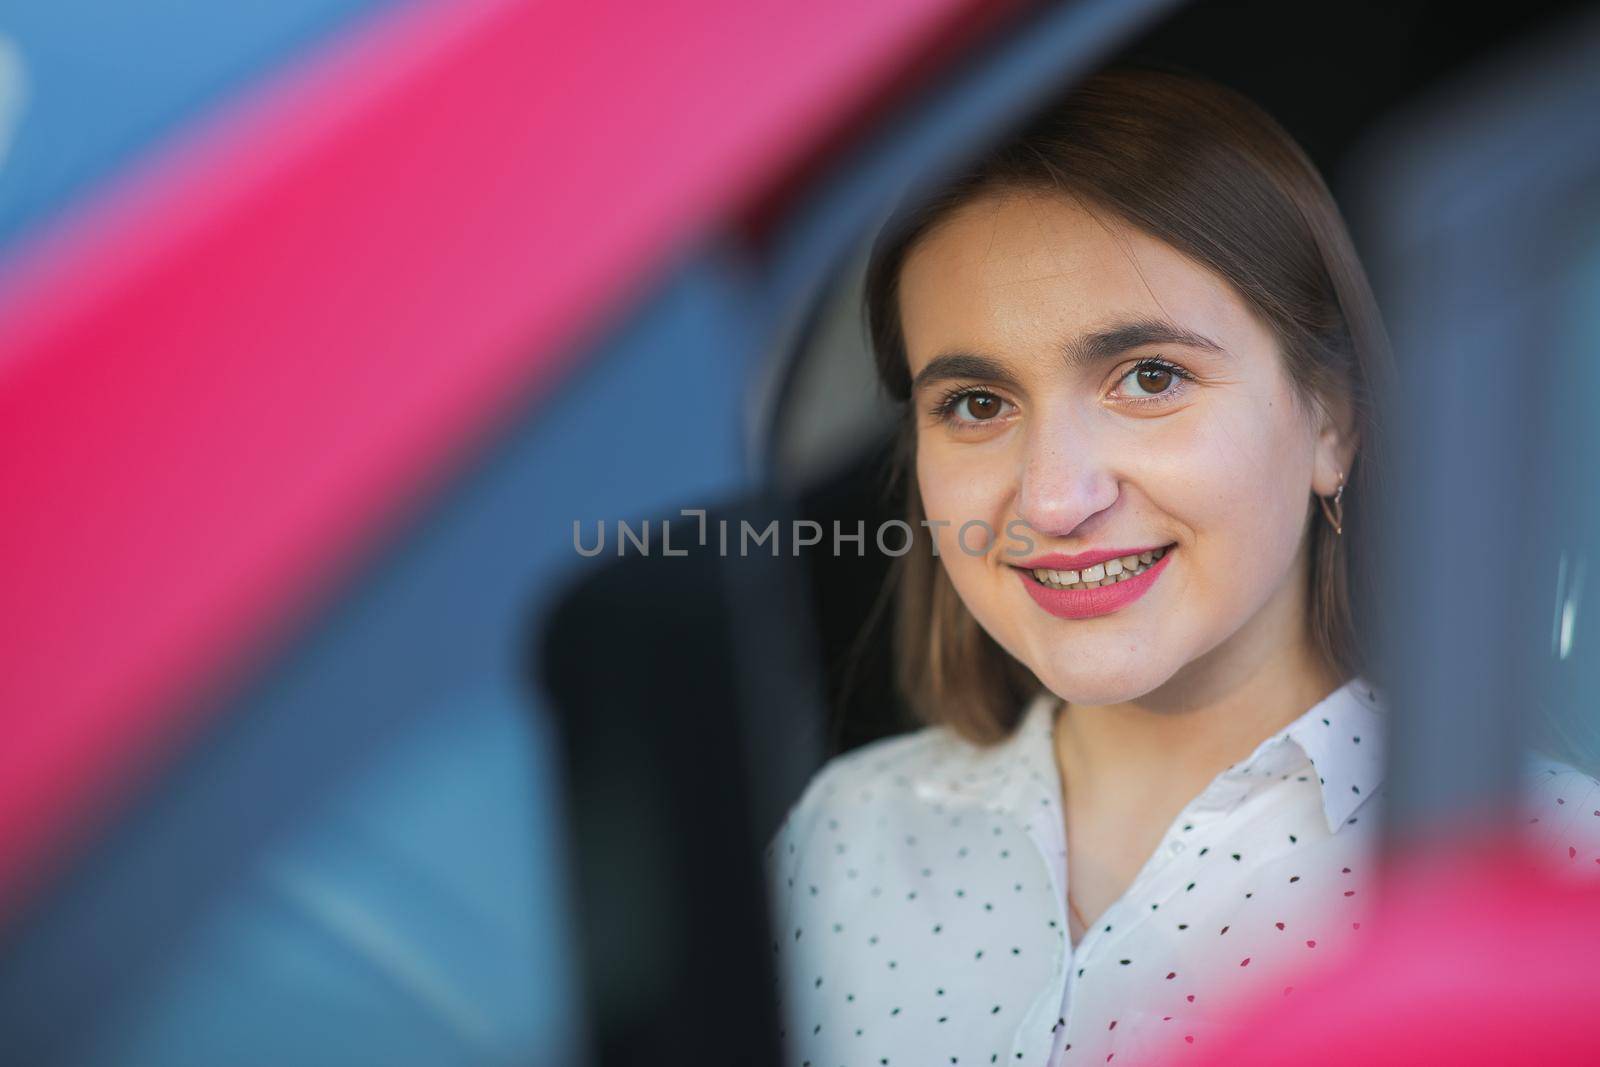 Portrait of Caucasian woman looking through car window to the camera and smiling